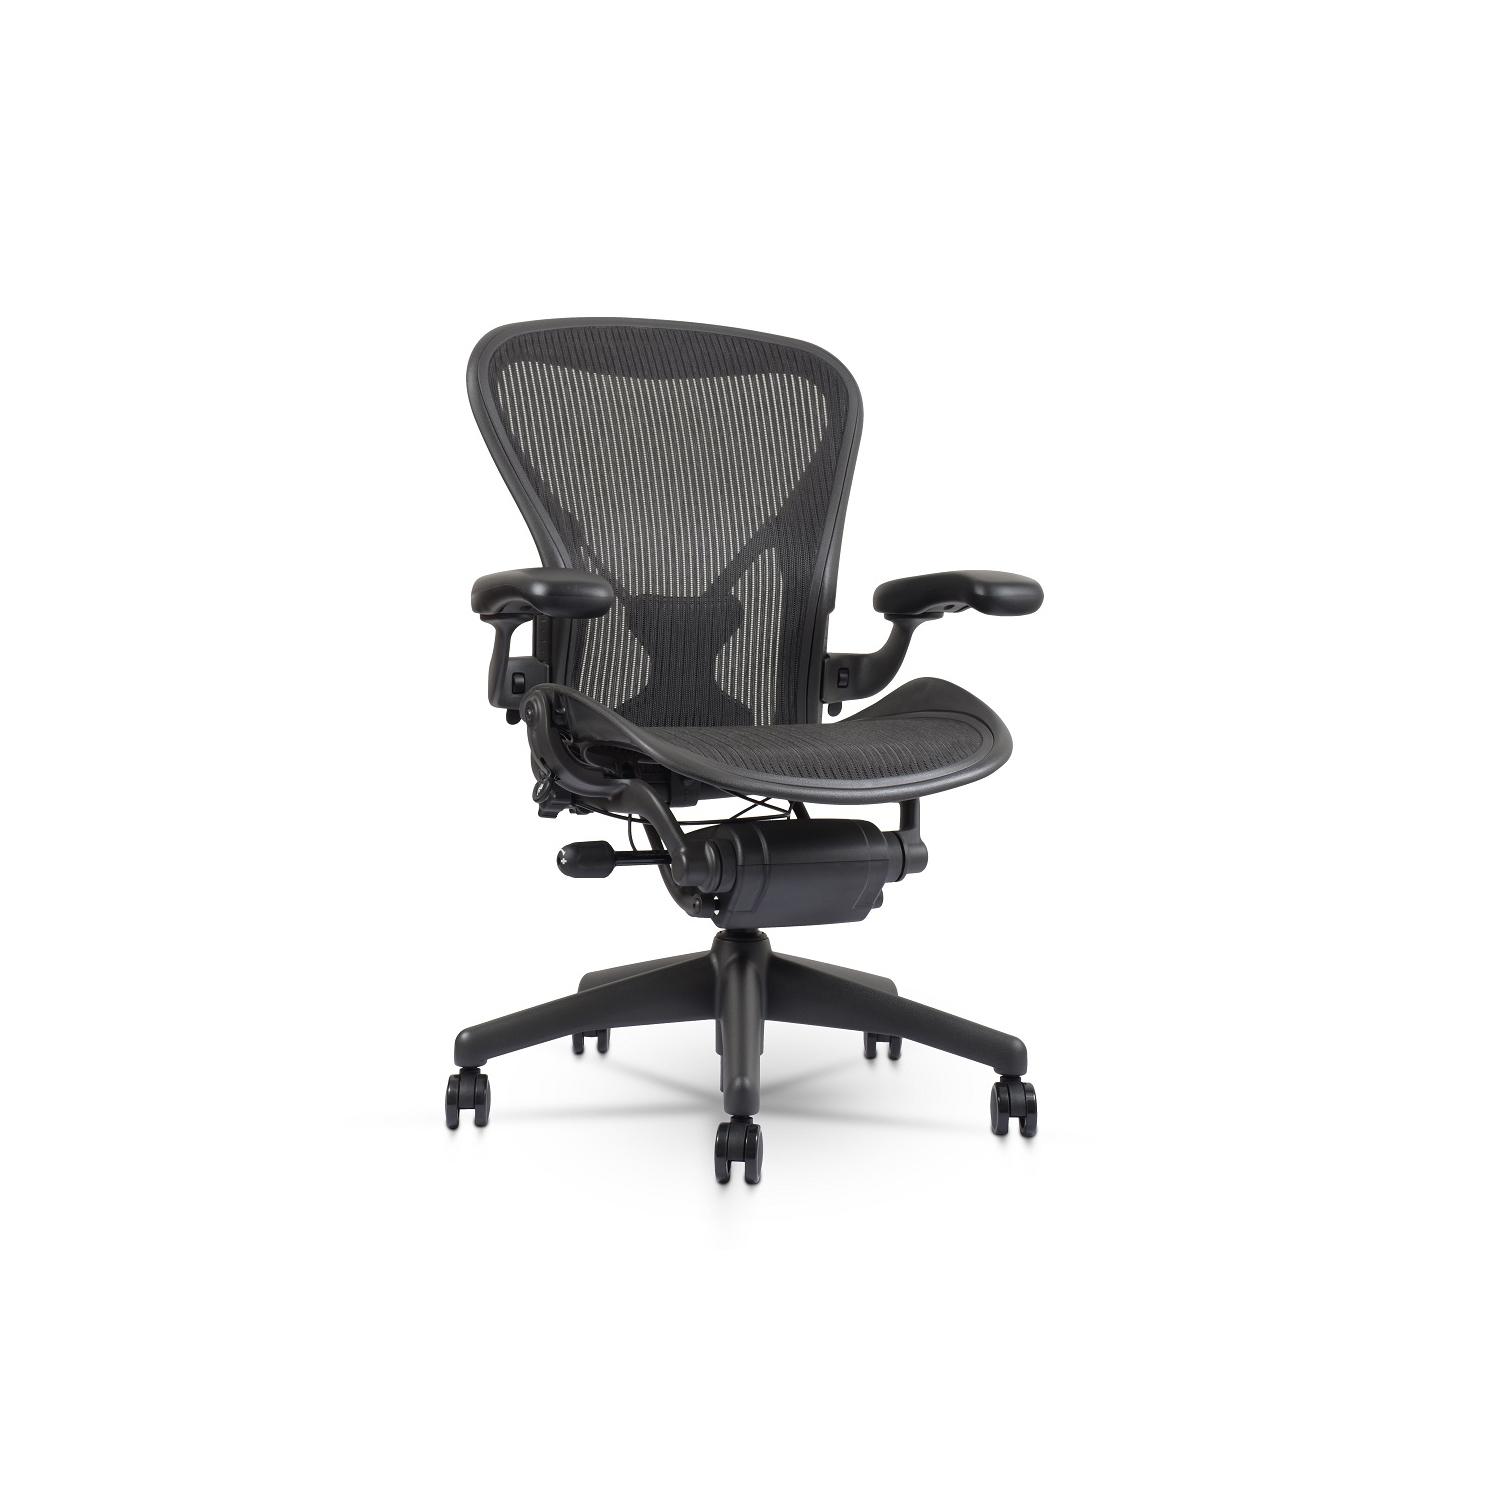 Refurbished (Good) - Herman Miller Classic Aeron Chair | Black | Size B | Fully Adjustable | Posture Fit | Clip Latch| (Renewed to New Condition) by Chairorama